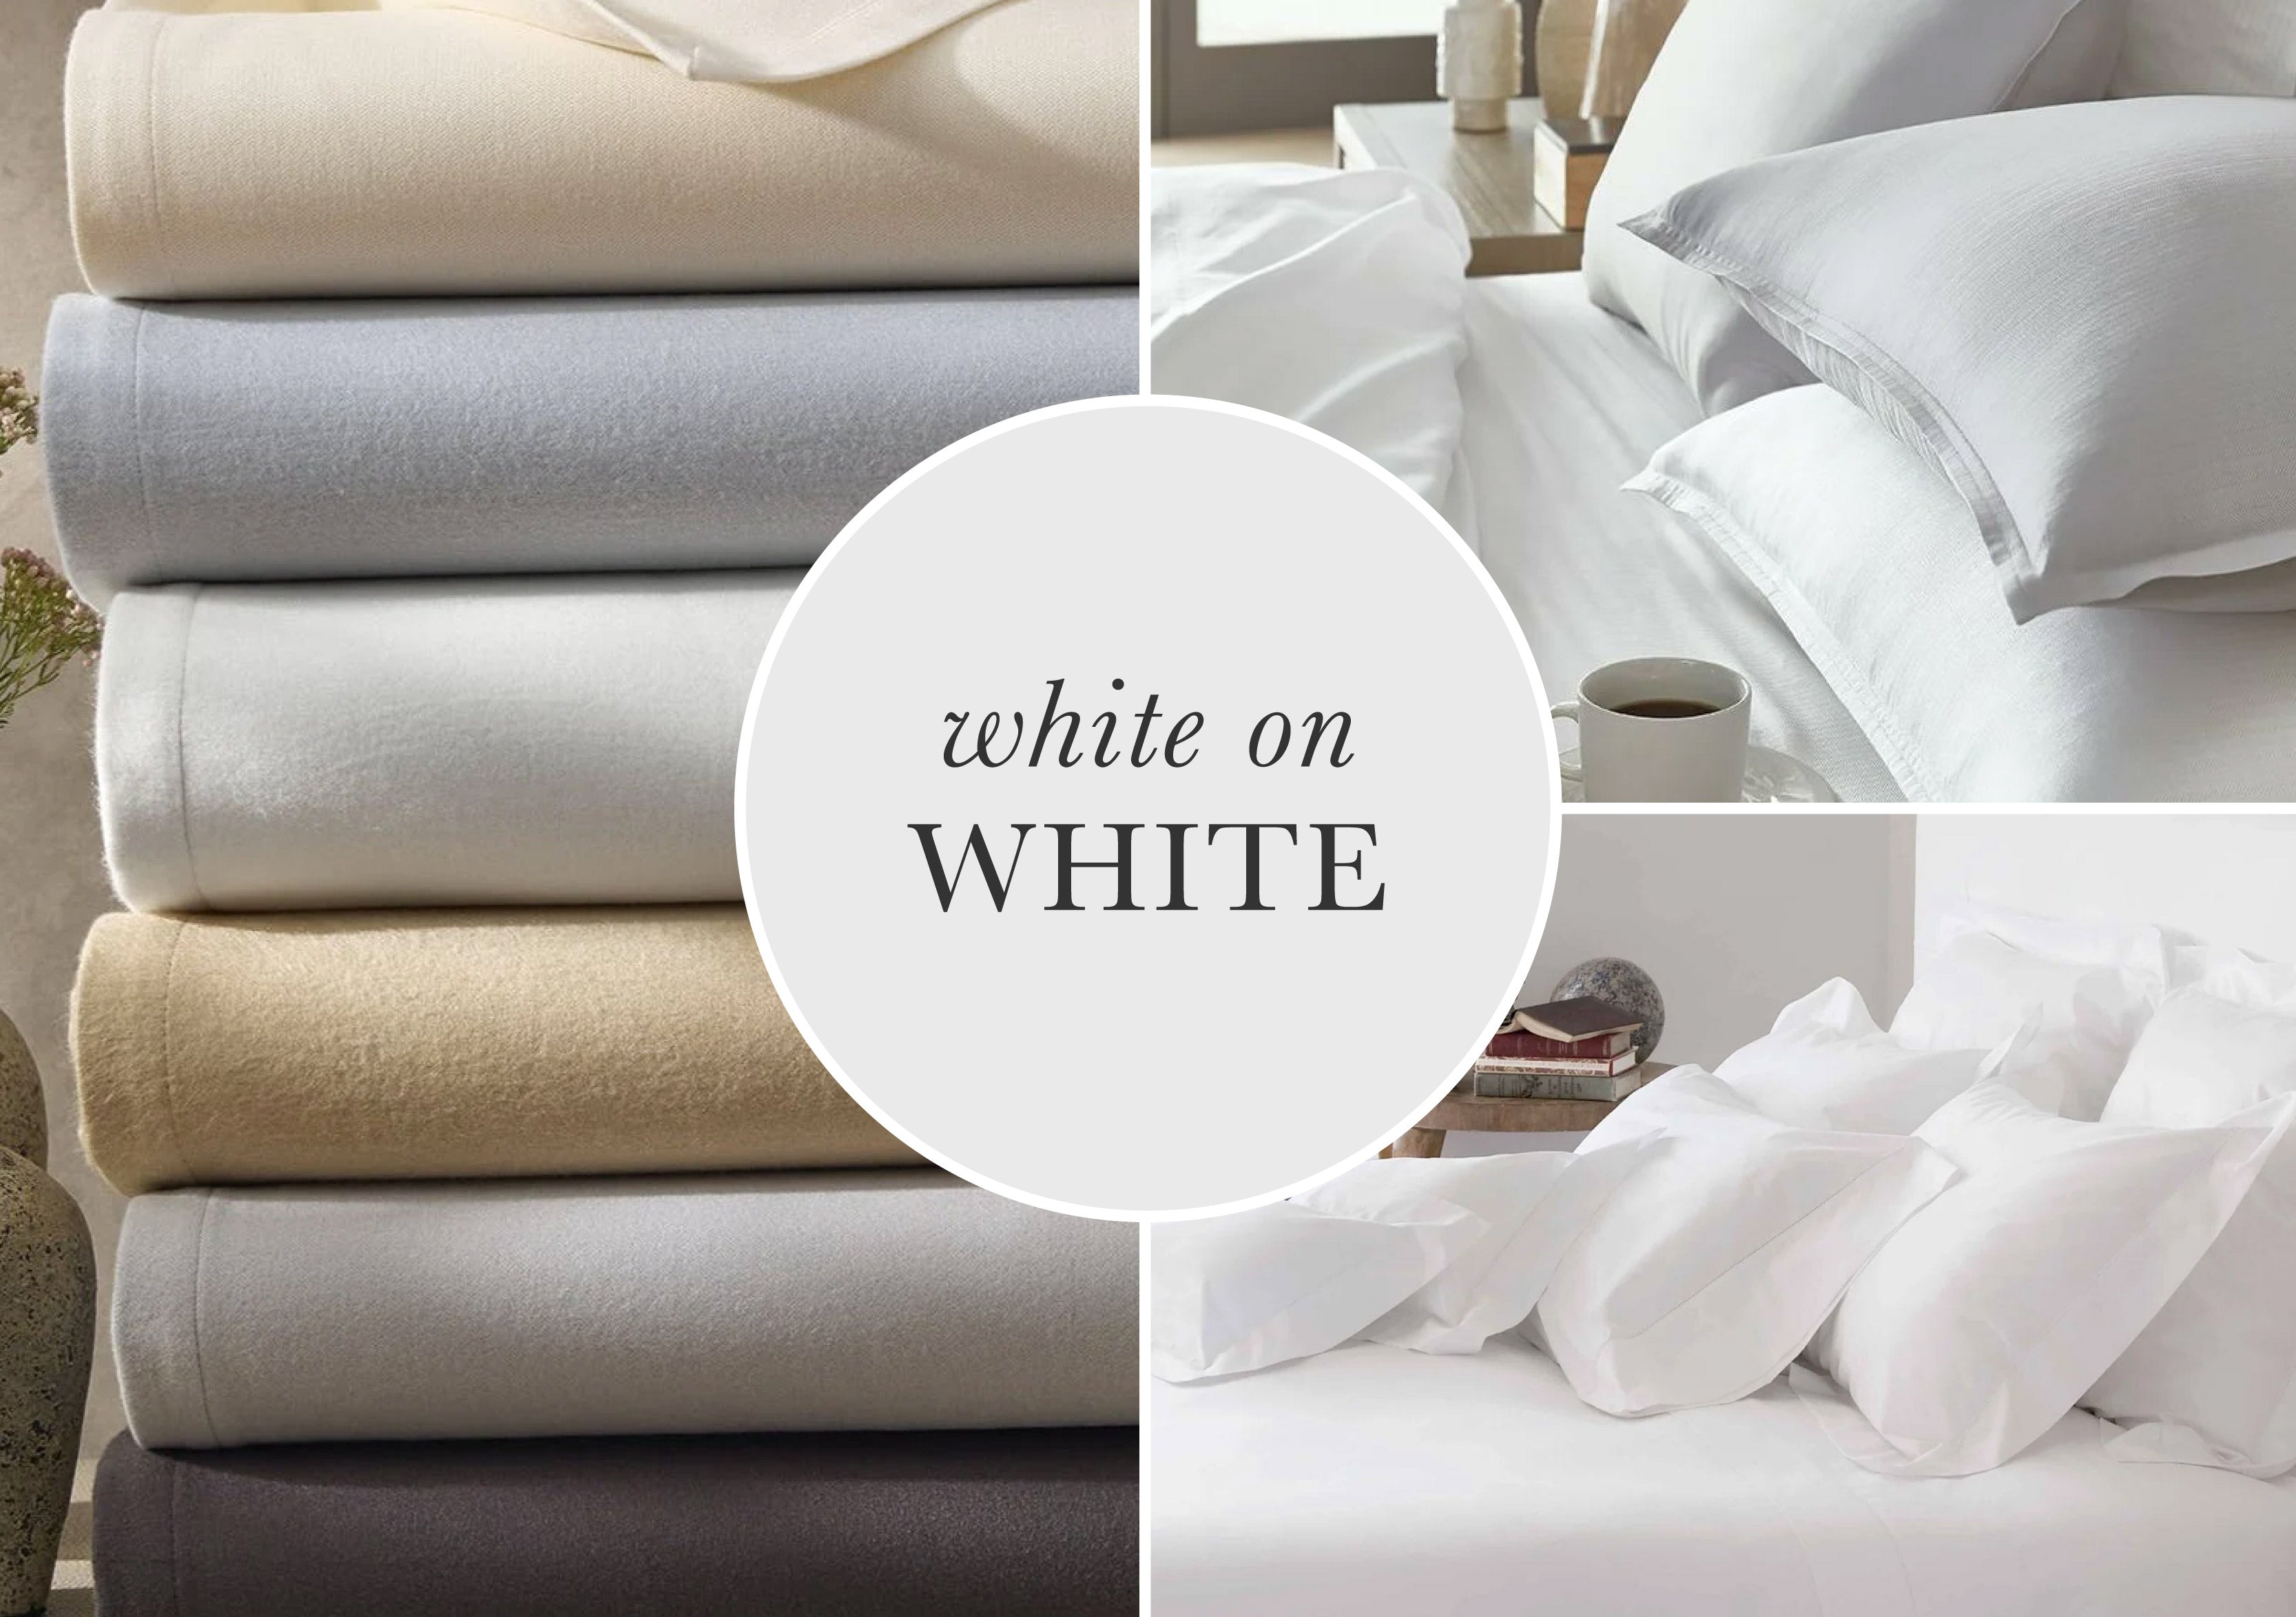 Shop the White-on-White Look